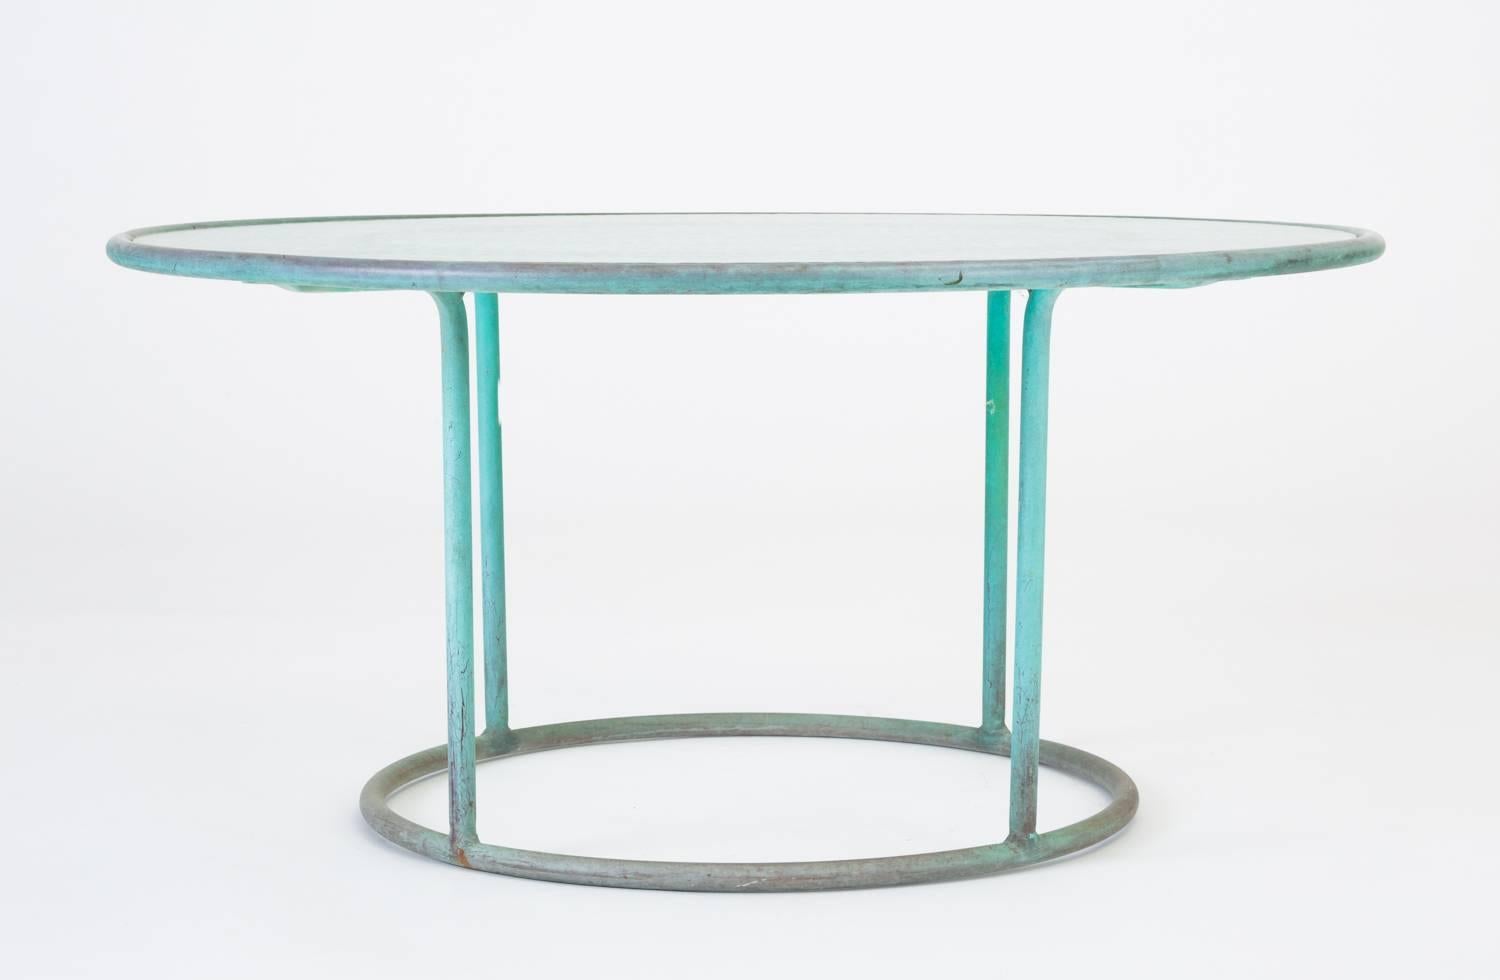 A patio coffee table in patinated bronze designed by Walter Lamb and produced by Brown Jordan. The frame is described by two concentric rings of bronze with radial supports and a circular bronze base. The round tabletop is a single piece of hammered